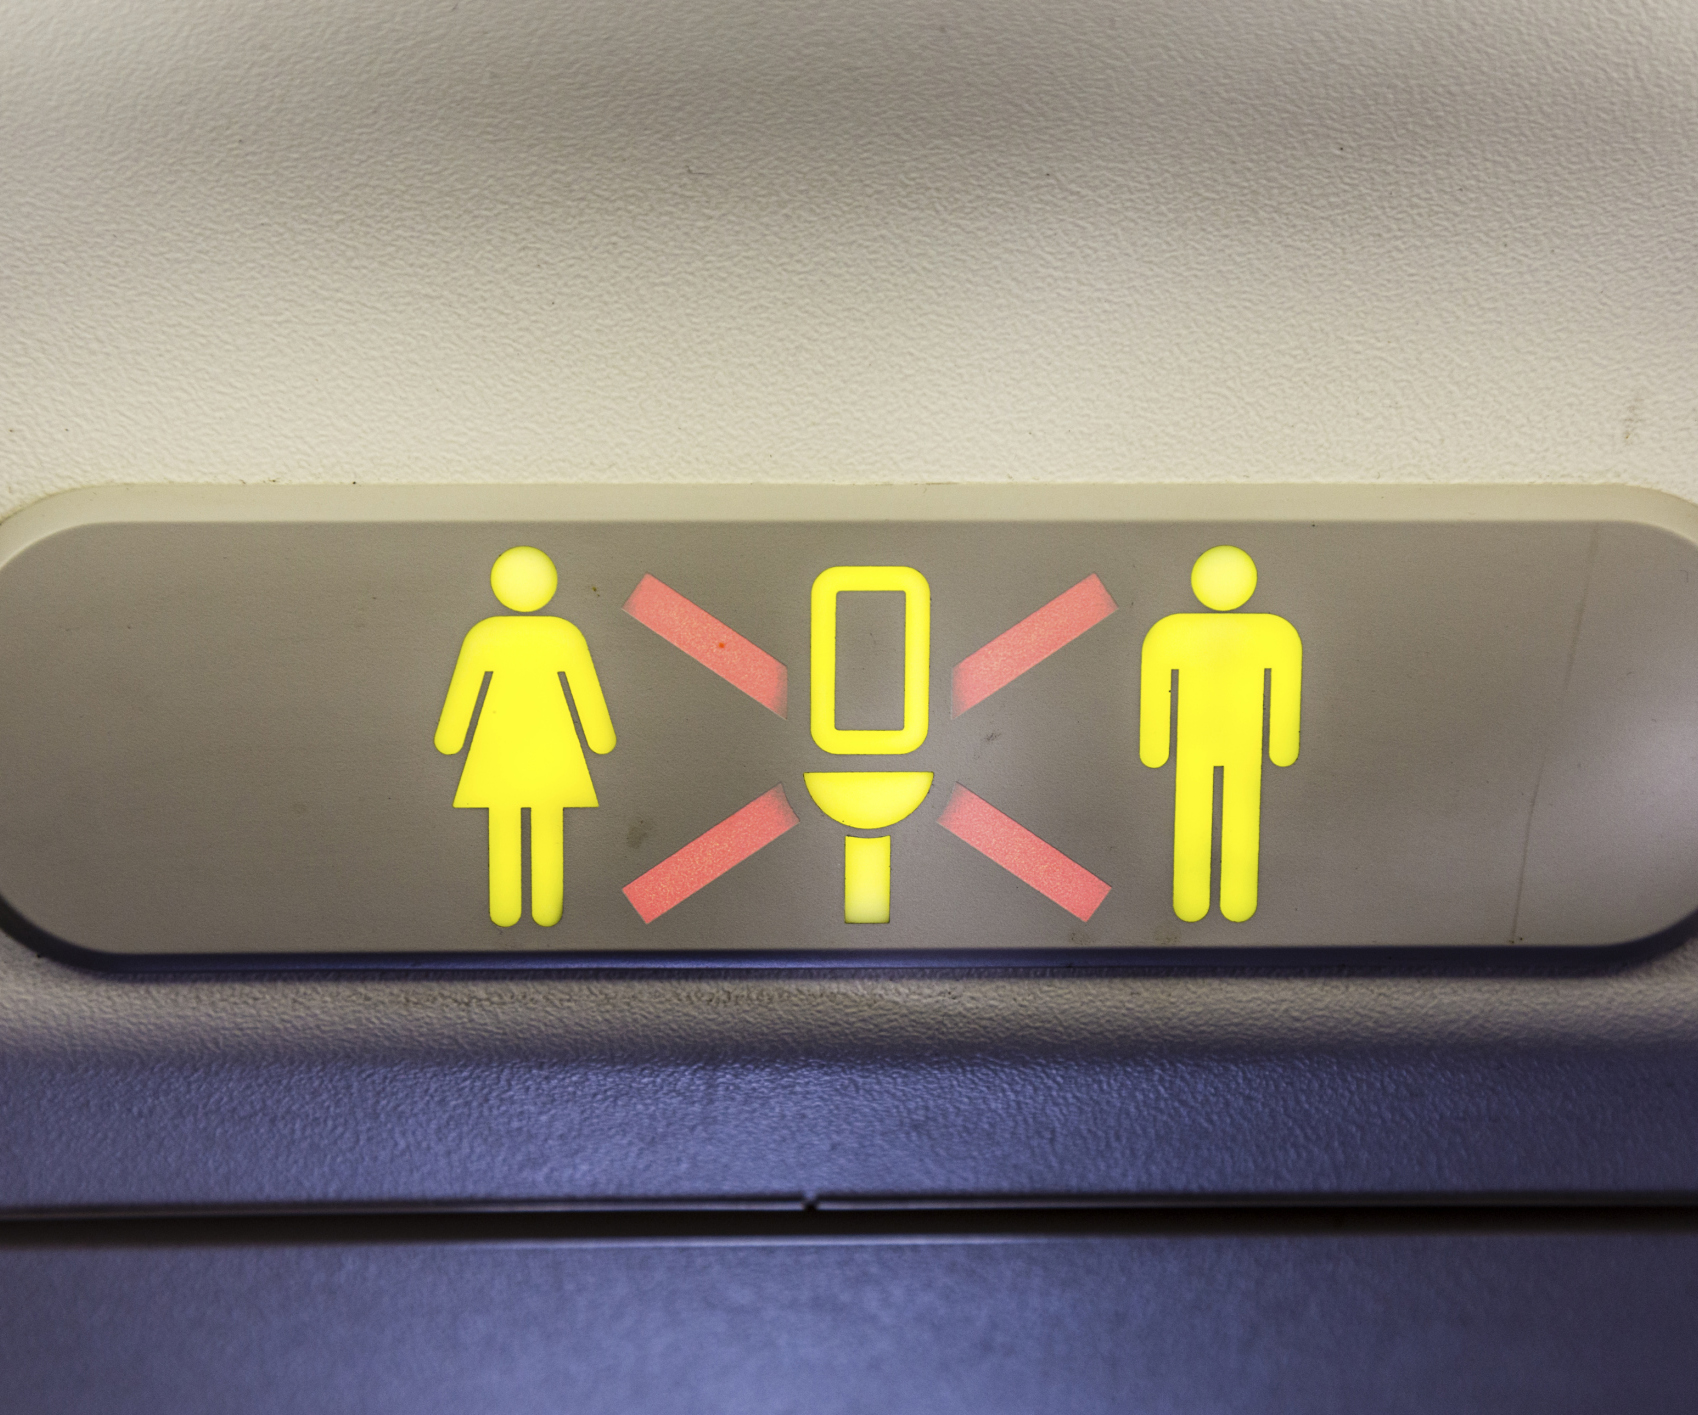 The dirtiest place on a plane is not the bathroom